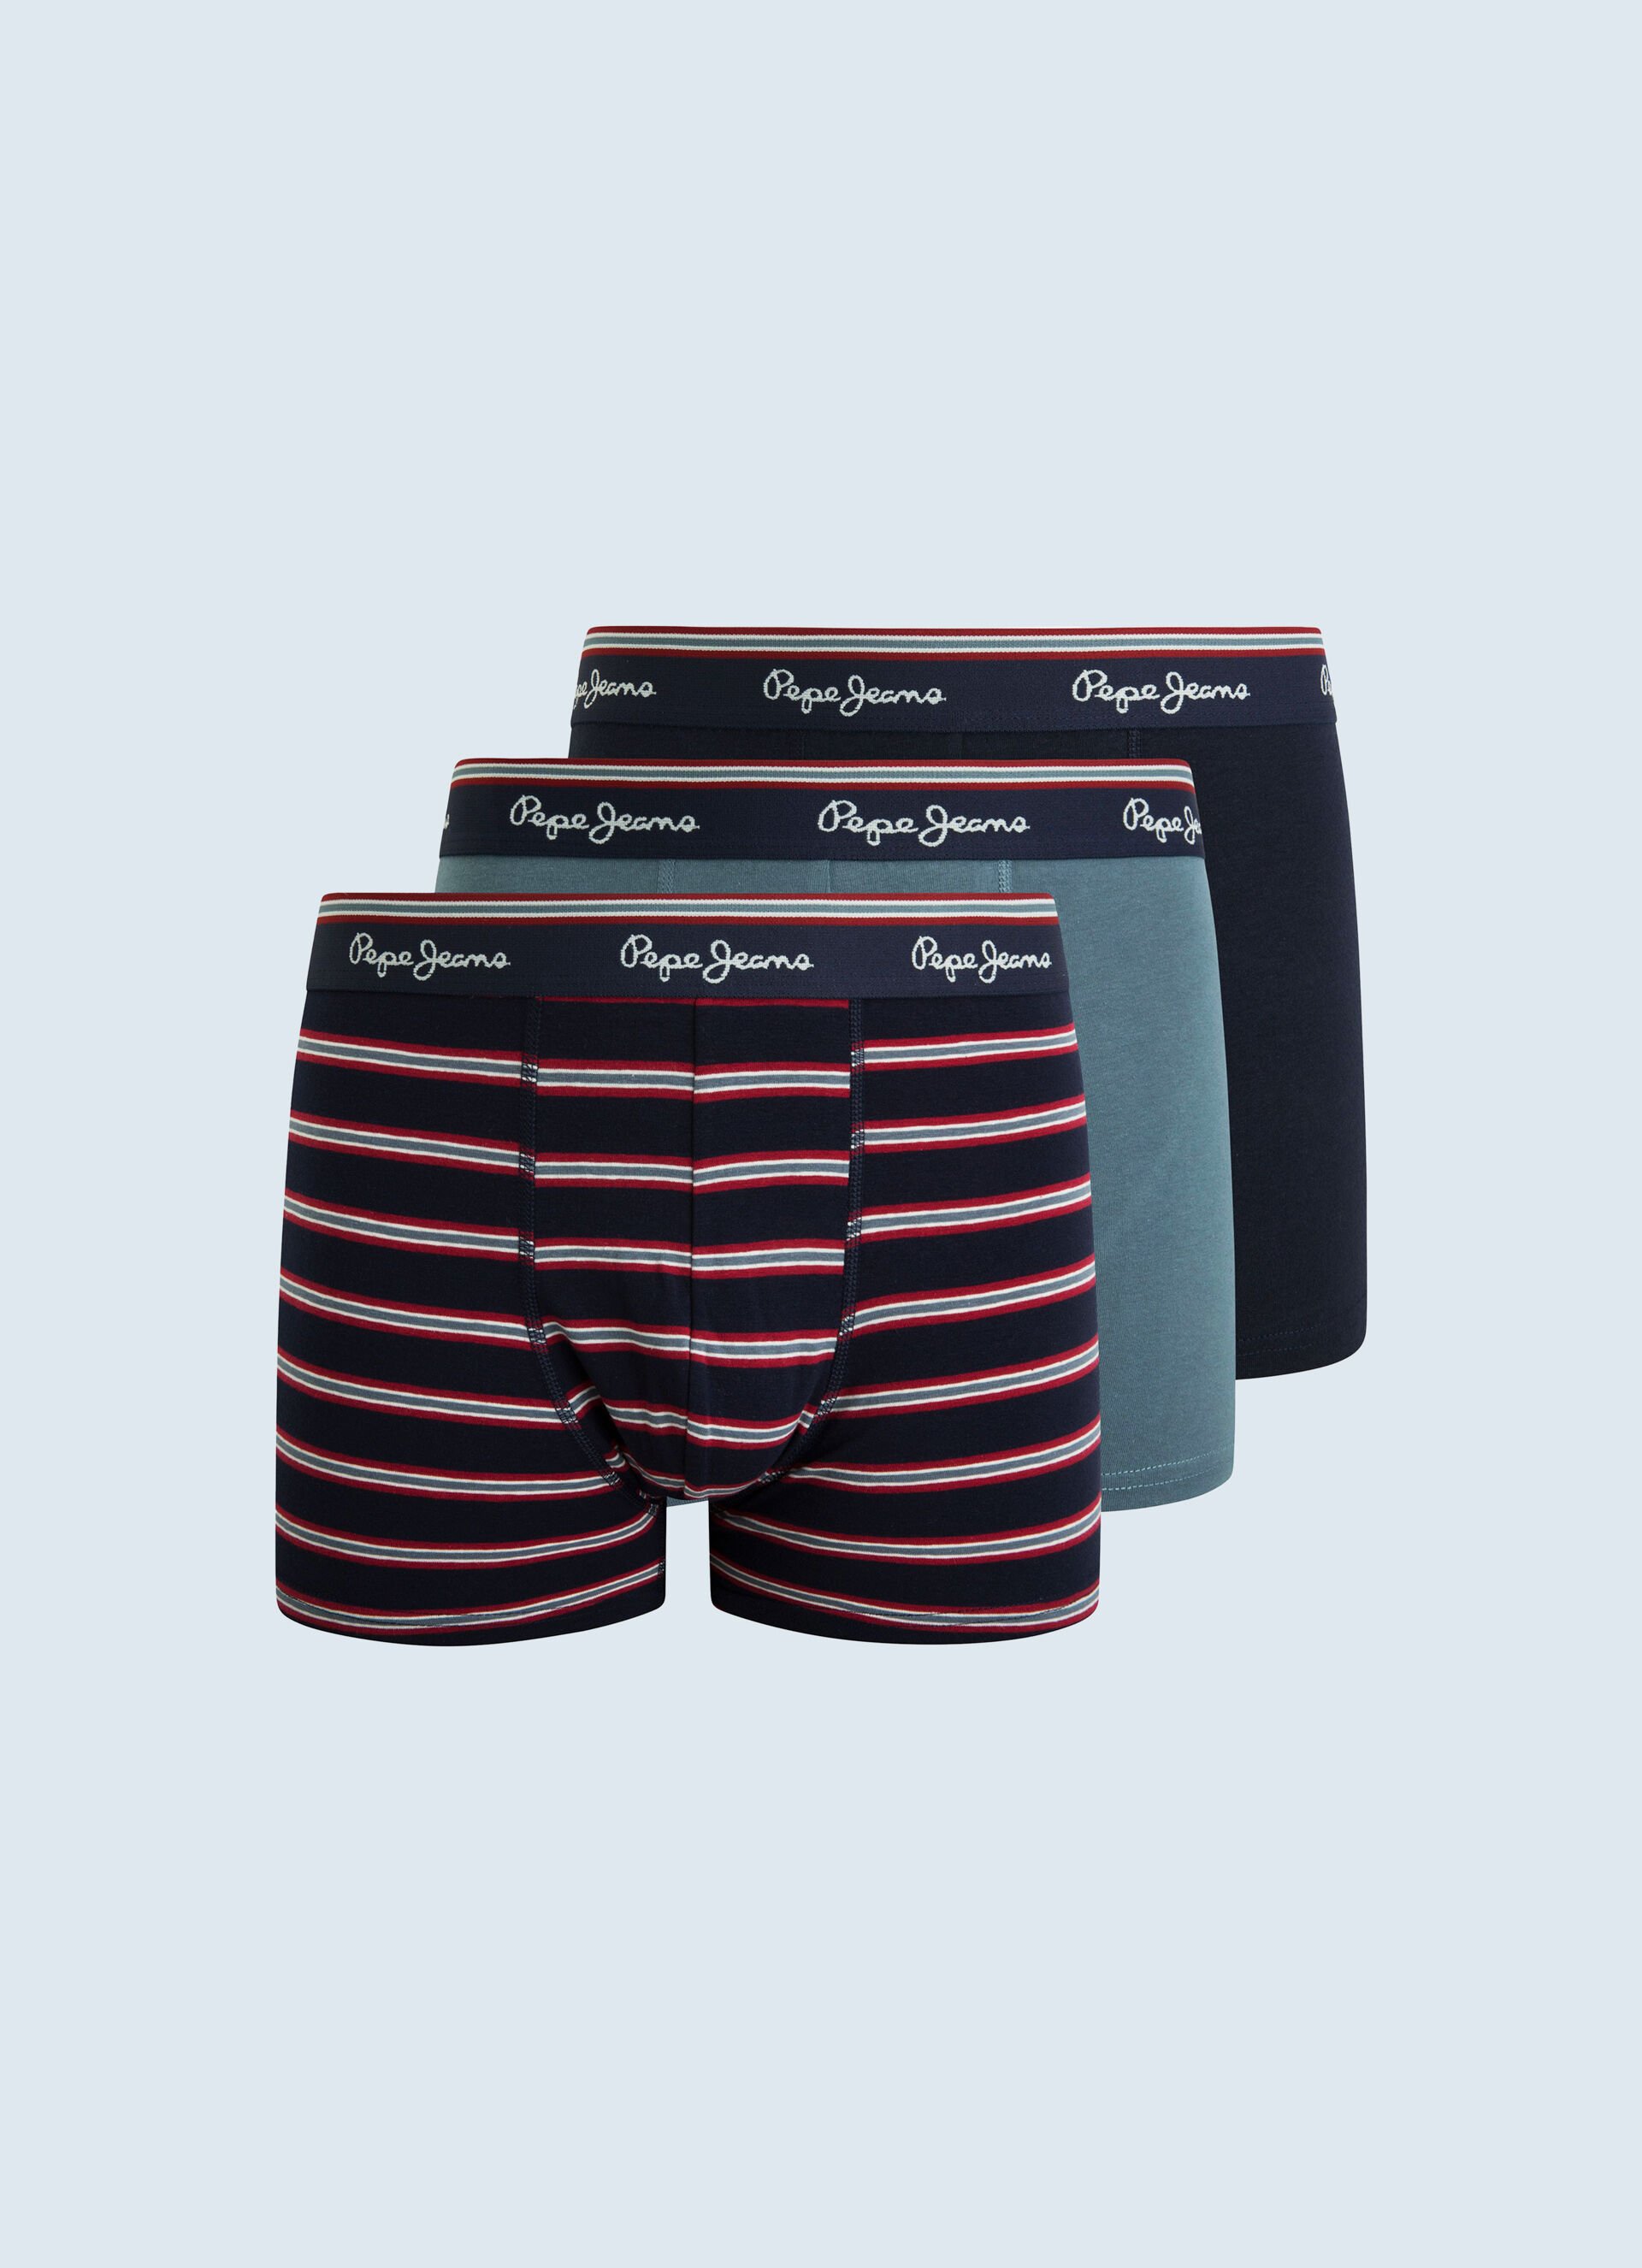 Calzoncillos Pepe Jeans Factory Sale, SAVE 57%.